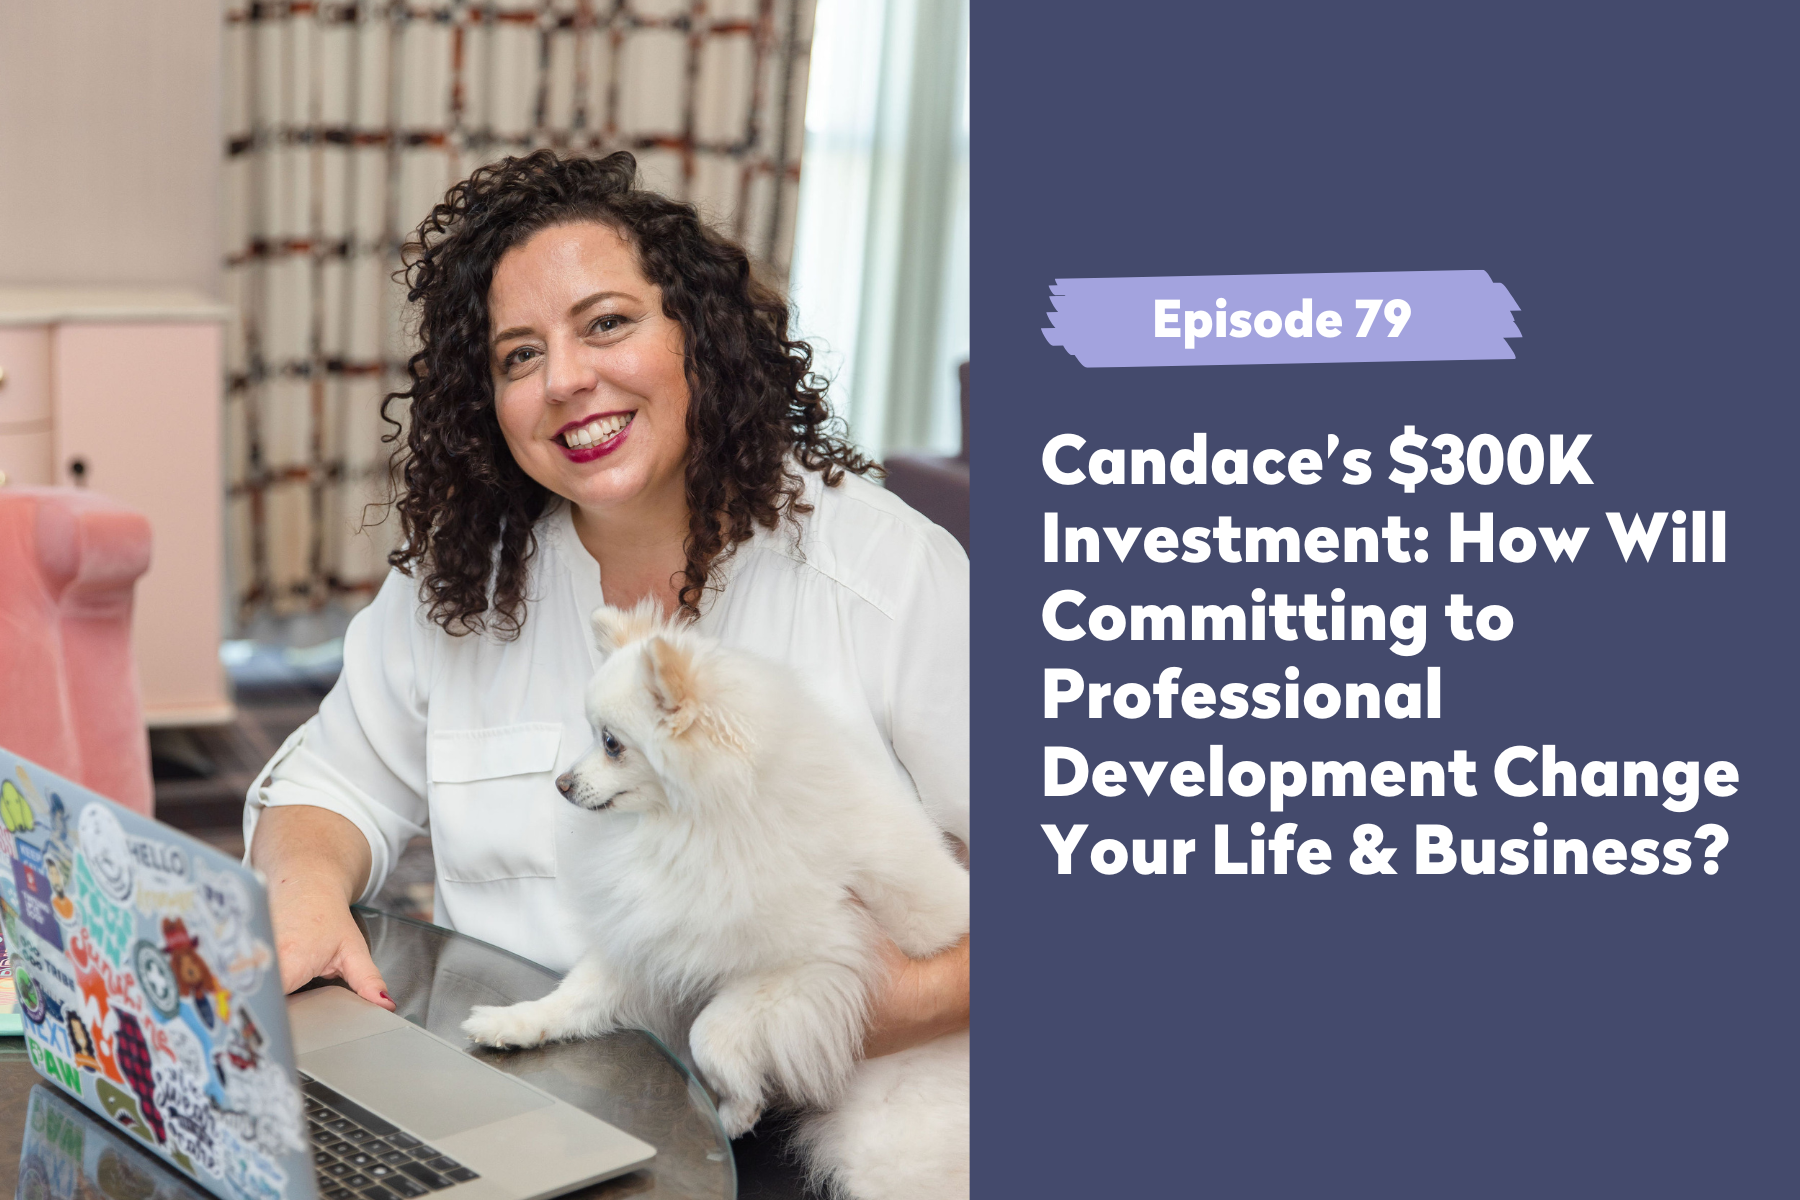 Episode 79 | Candace’s $300K Investment: How Will Committing to Professional Development Change Your Life & Business?